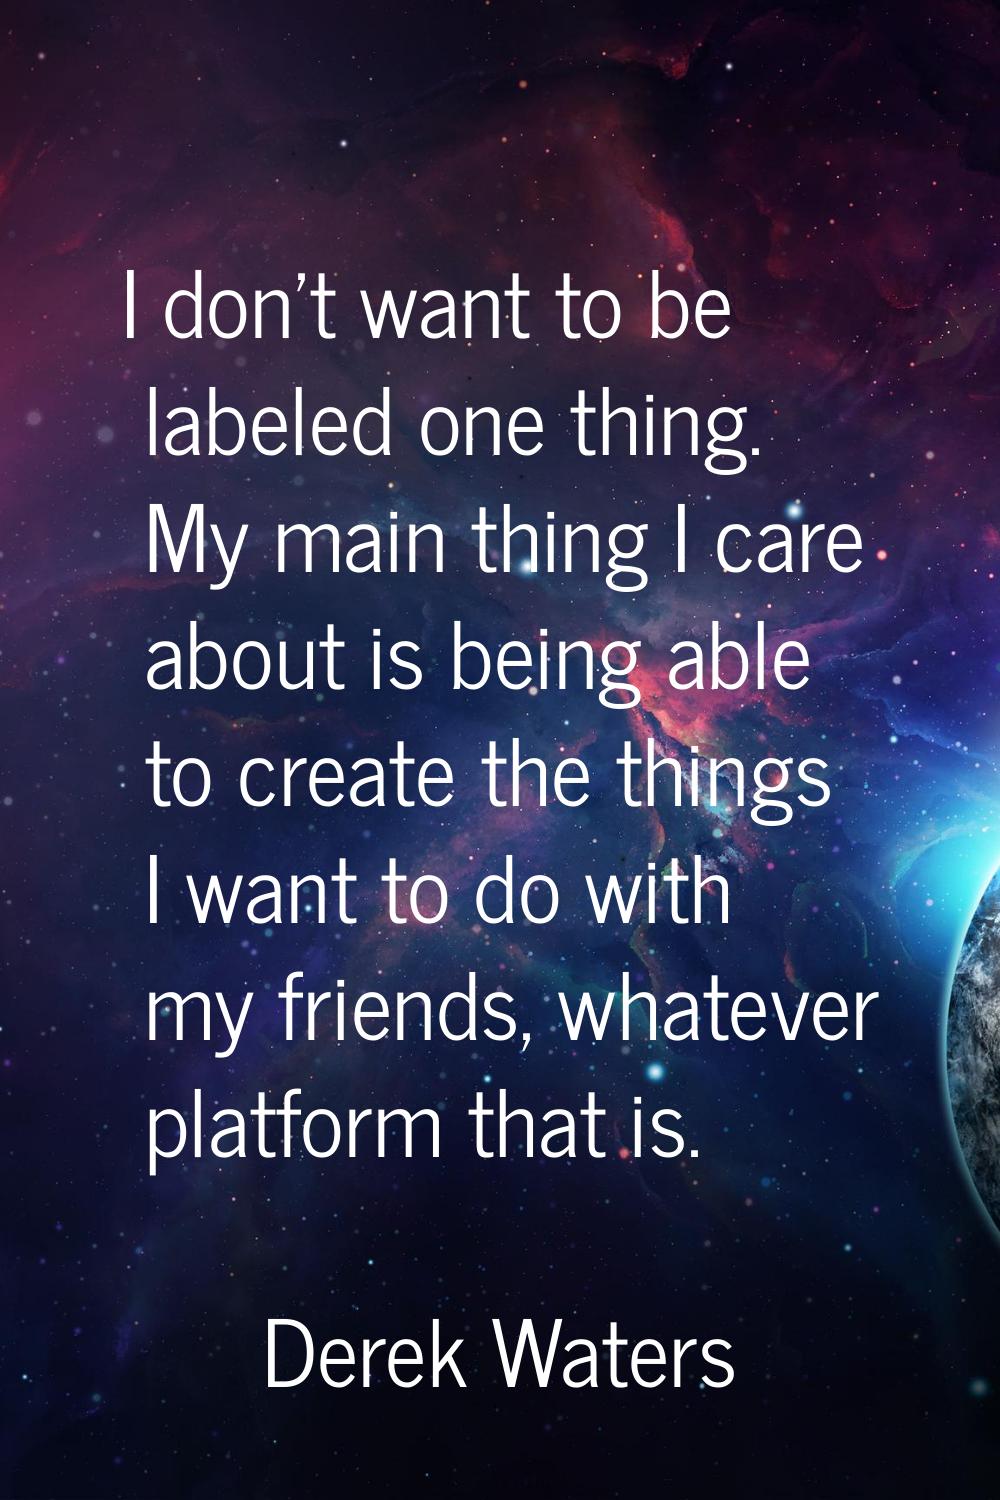 I don't want to be labeled one thing. My main thing I care about is being able to create the things